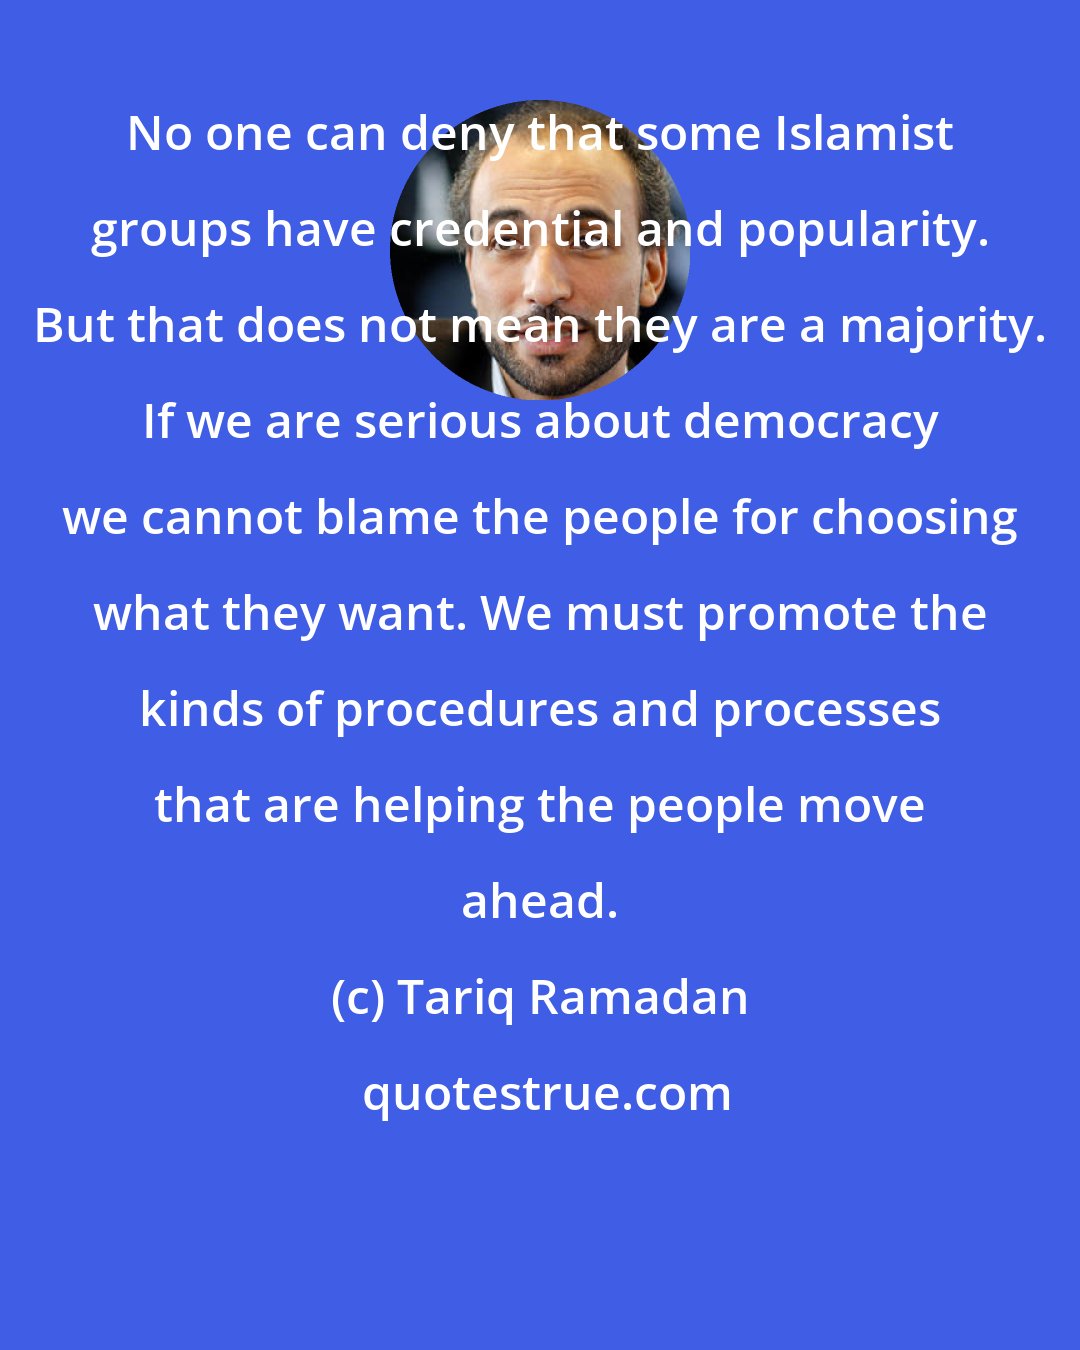 Tariq Ramadan: No one can deny that some Islamist groups have credential and popularity. But that does not mean they are a majority. If we are serious about democracy we cannot blame the people for choosing what they want. We must promote the kinds of procedures and processes that are helping the people move ahead.